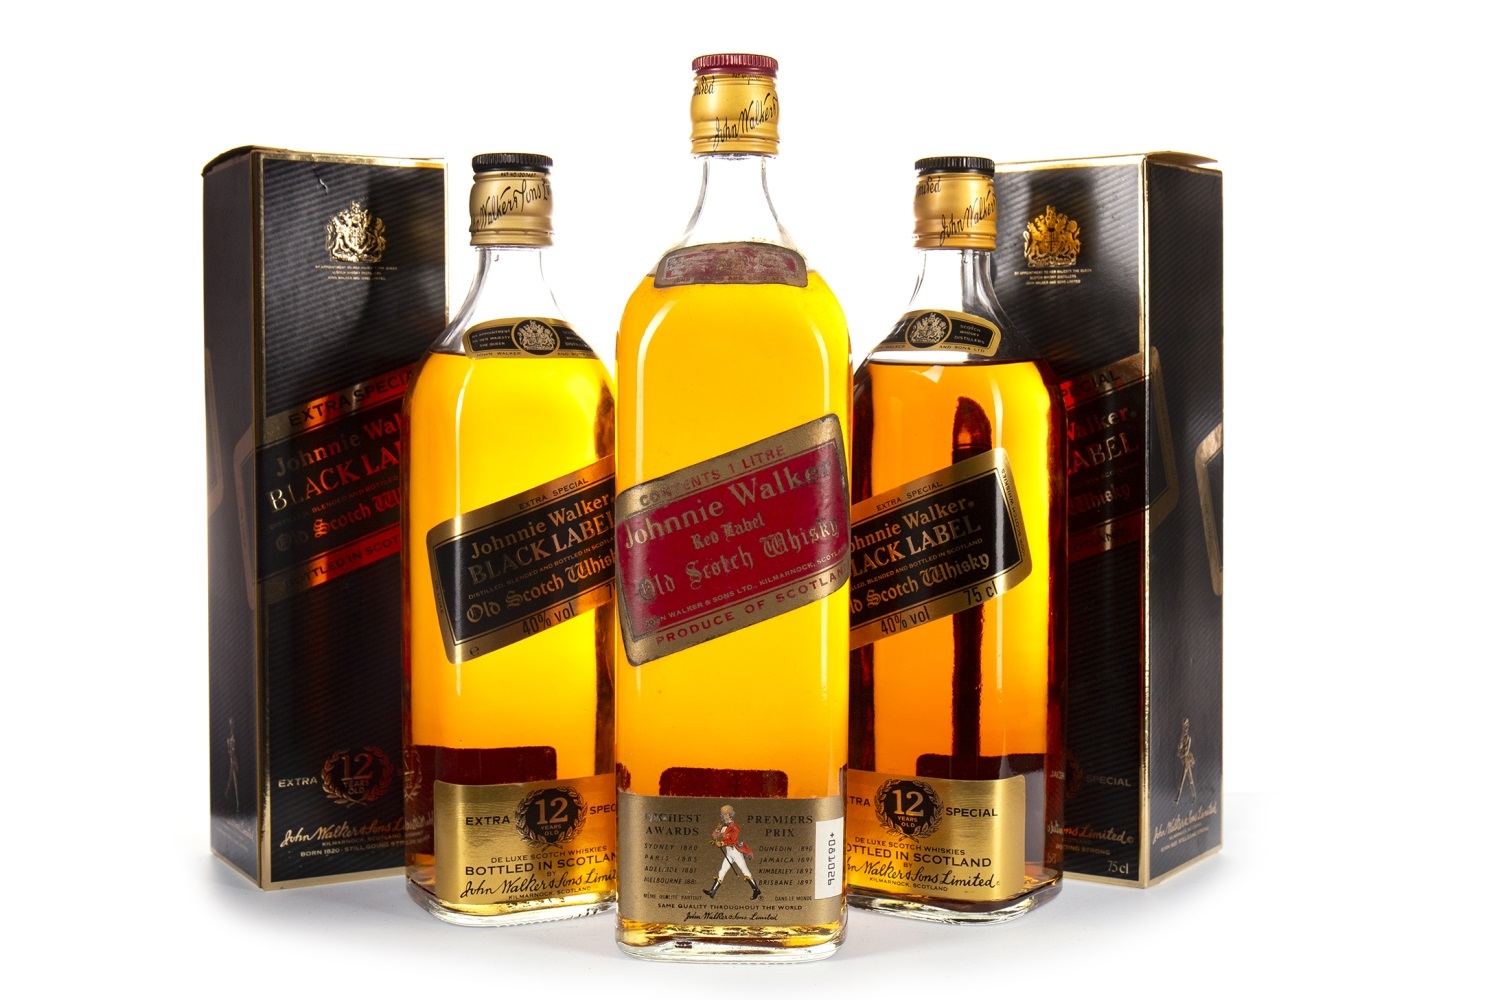 TWO BOTTLES OF JOHNNIE WALKER BLACK LABEL, AND ONE LITRE OF JOHNNIE WALKER RED